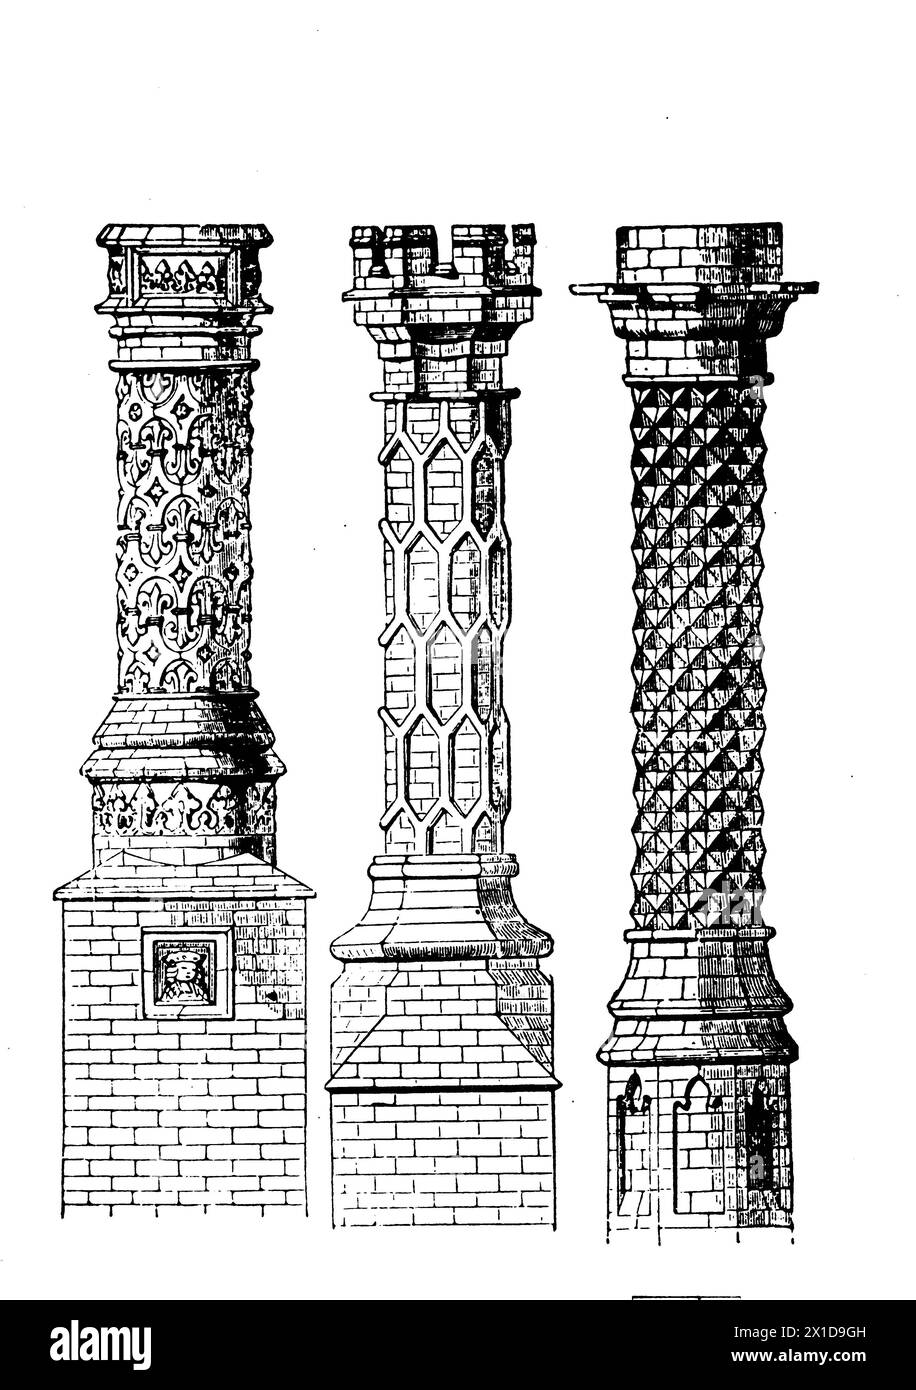 A historic 19th century illustration in black and white of decorative chimneys. Stock Photo